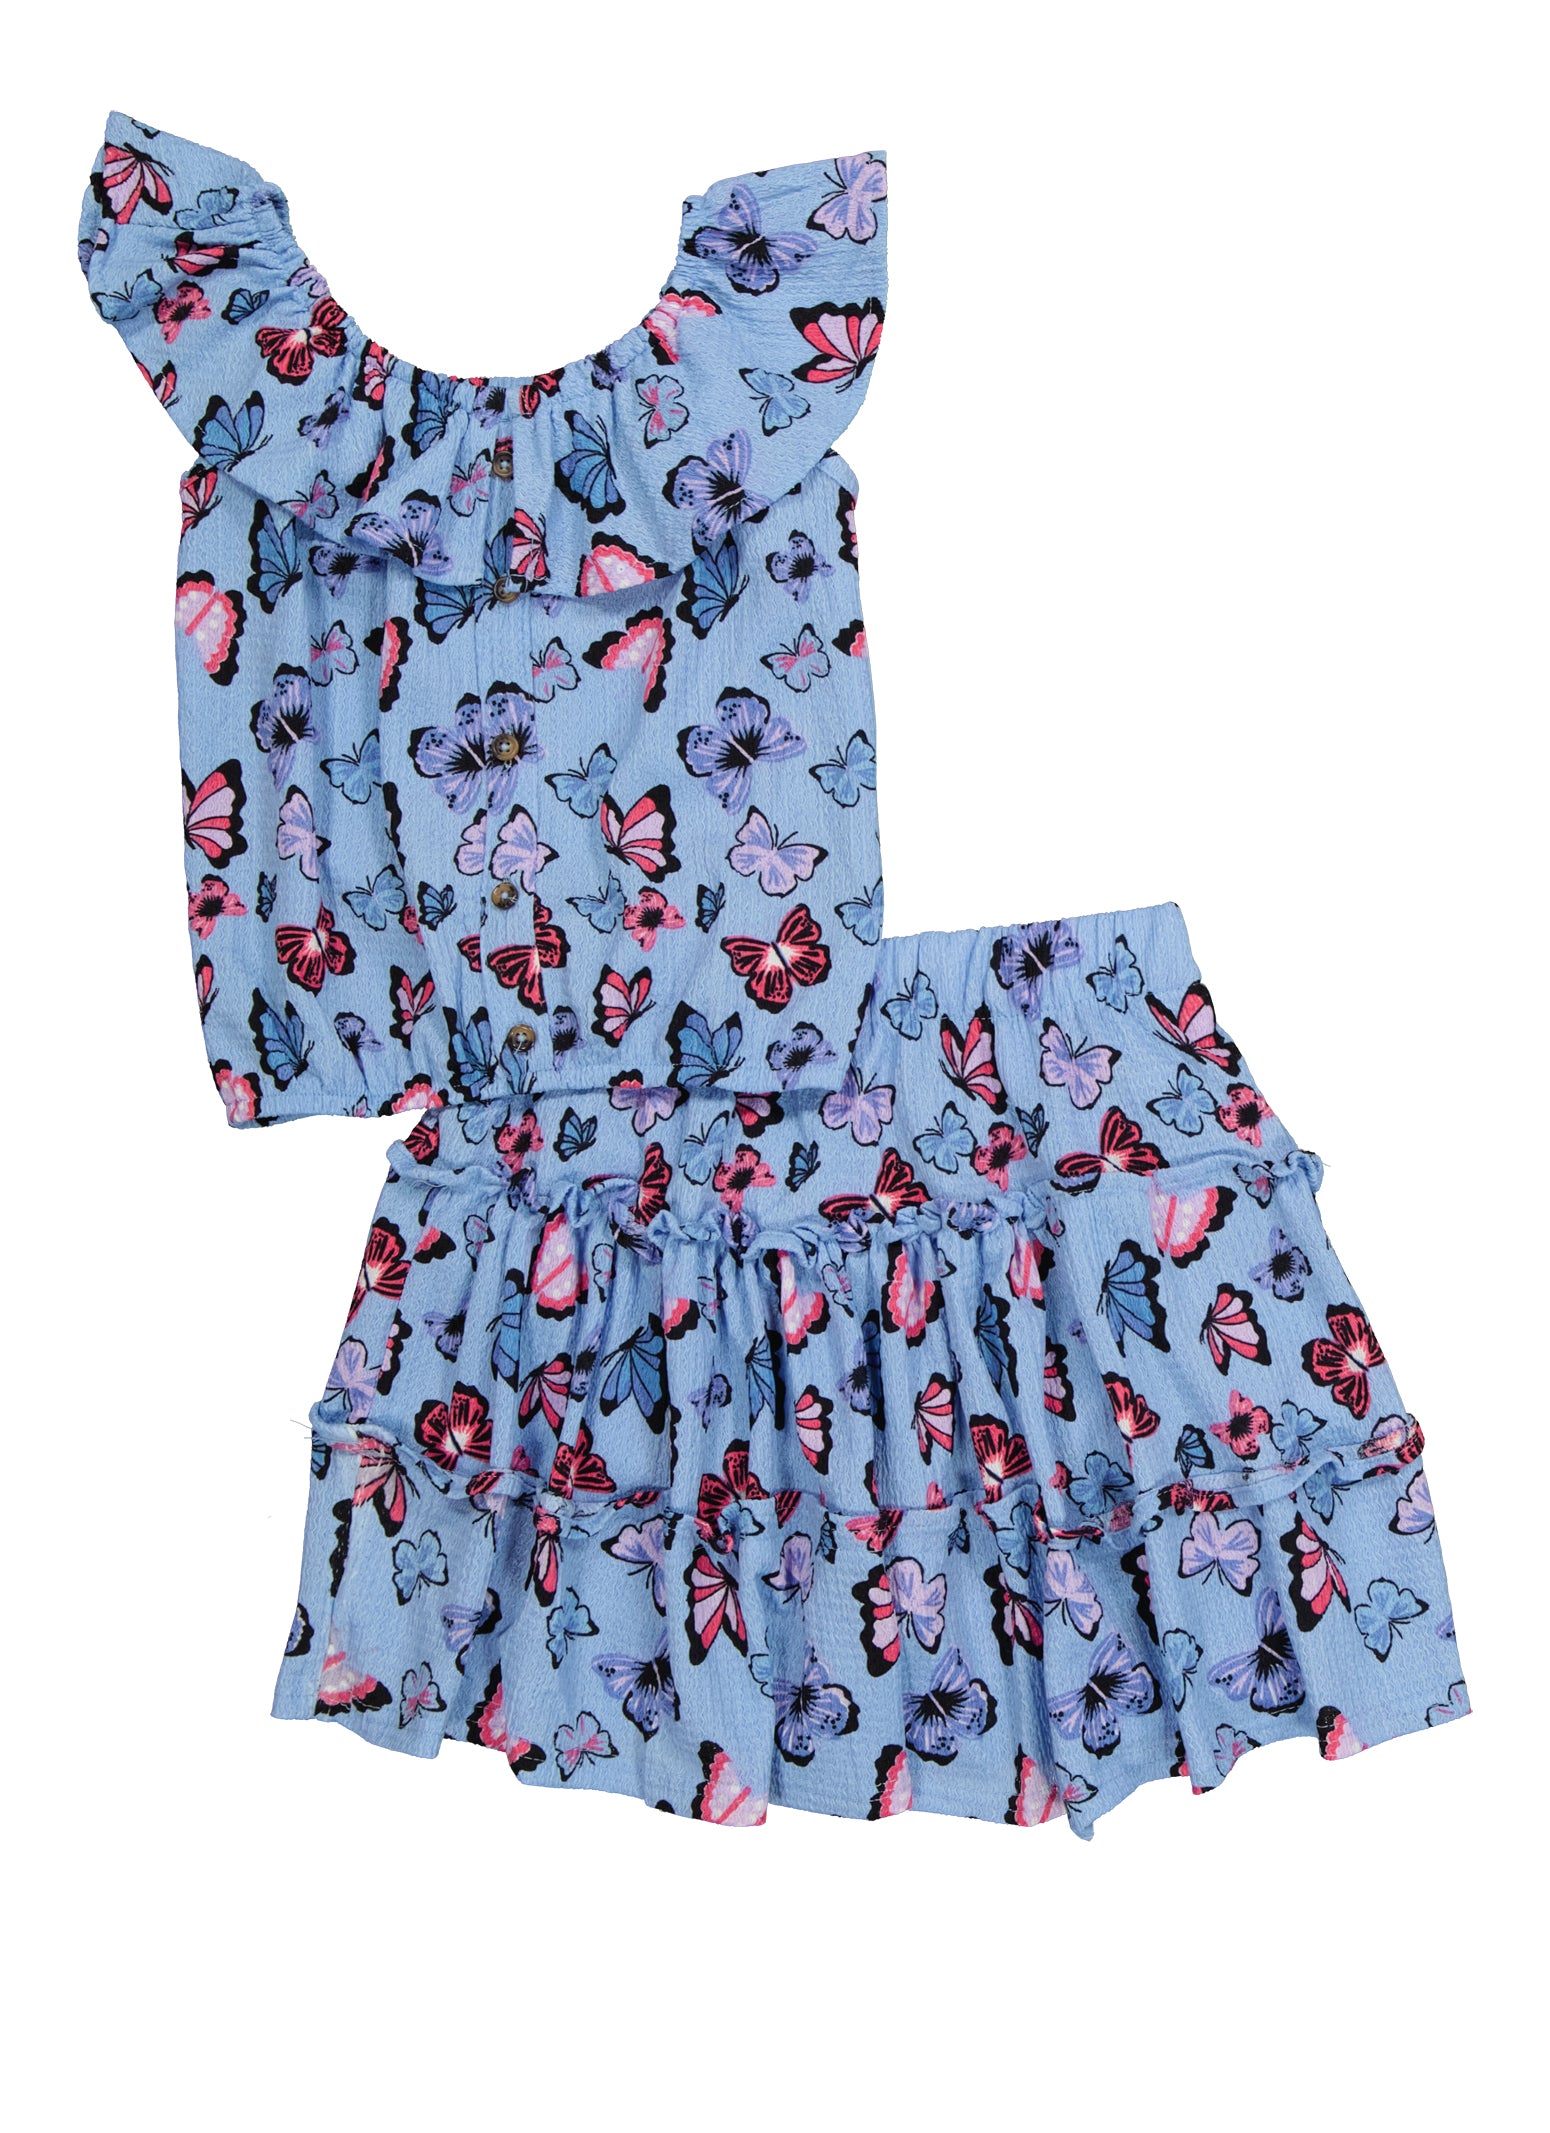 Girls Butterfly Print Ruffled Top and Tiered Skirt, Blue, Size 10-12